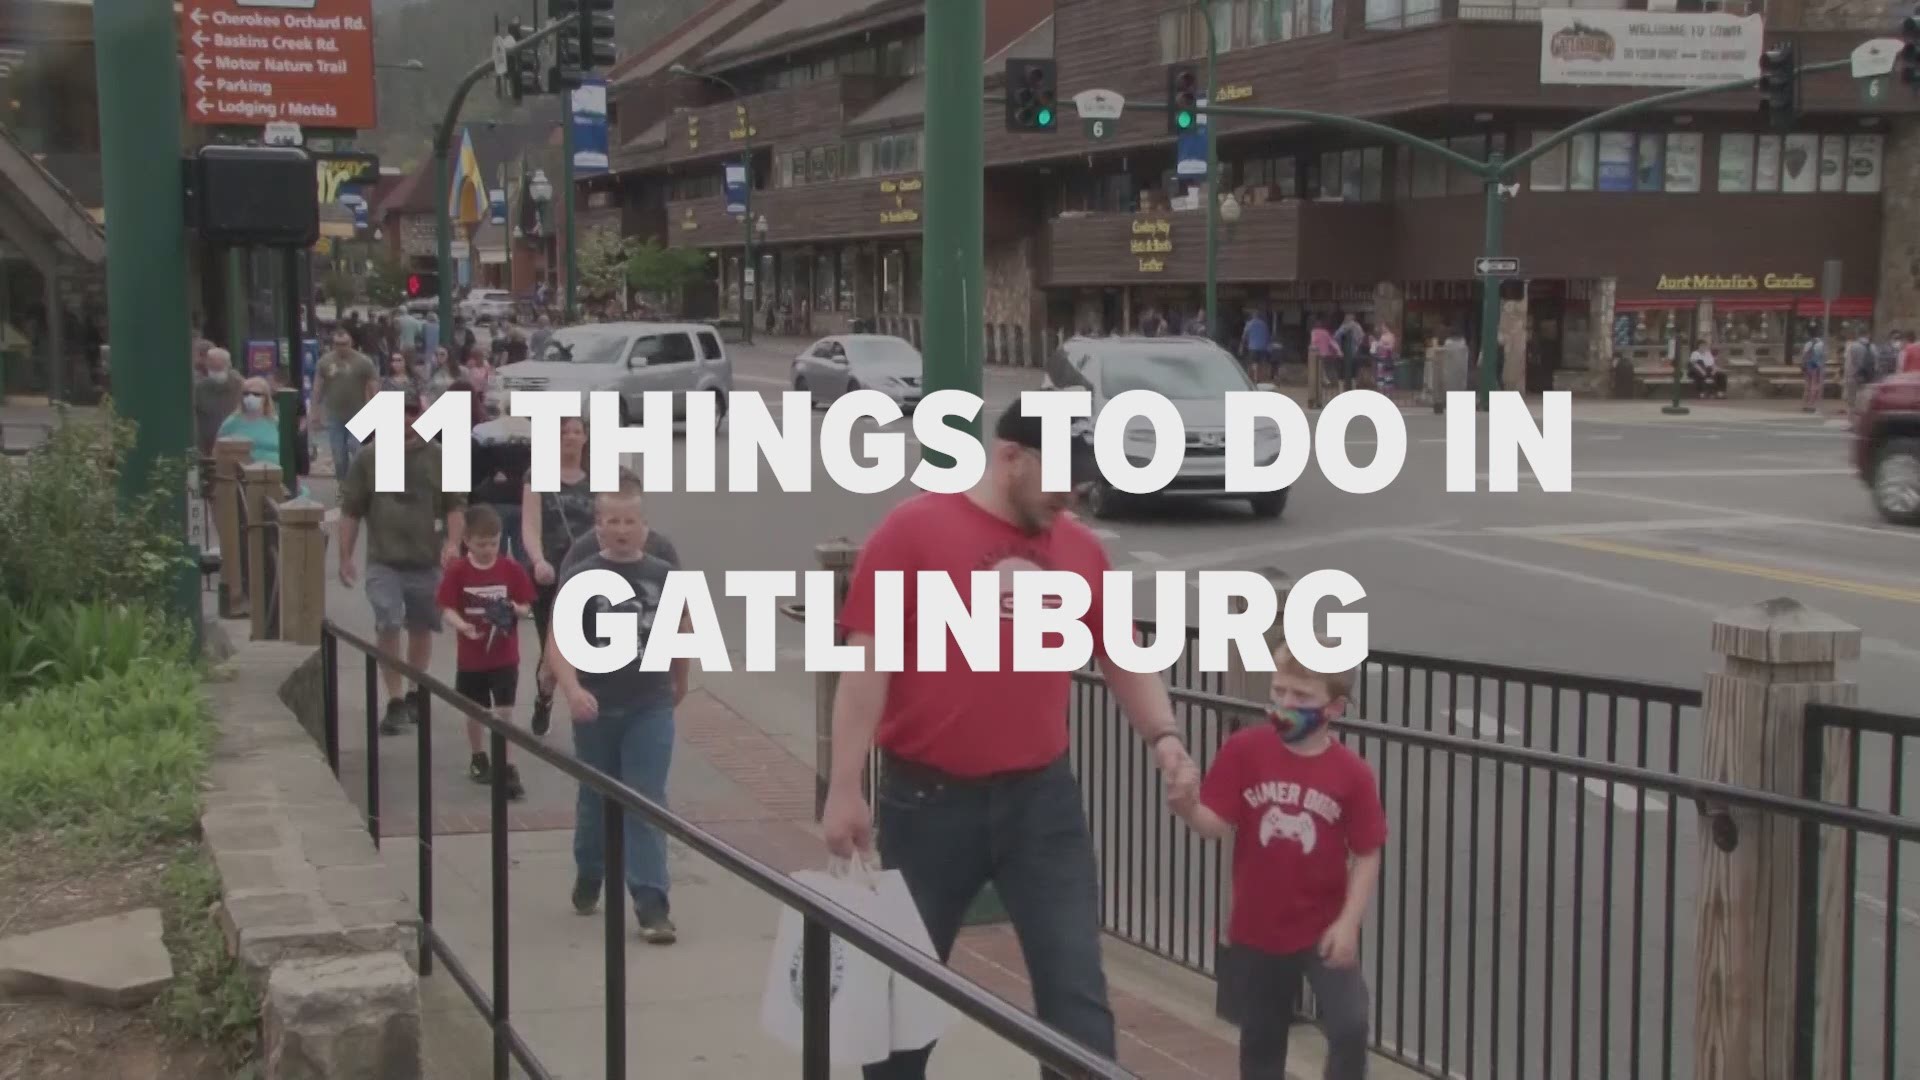 Mountain views, moonshine and mini-golf are just some ways to have fun on your trip to Gatlinburg.